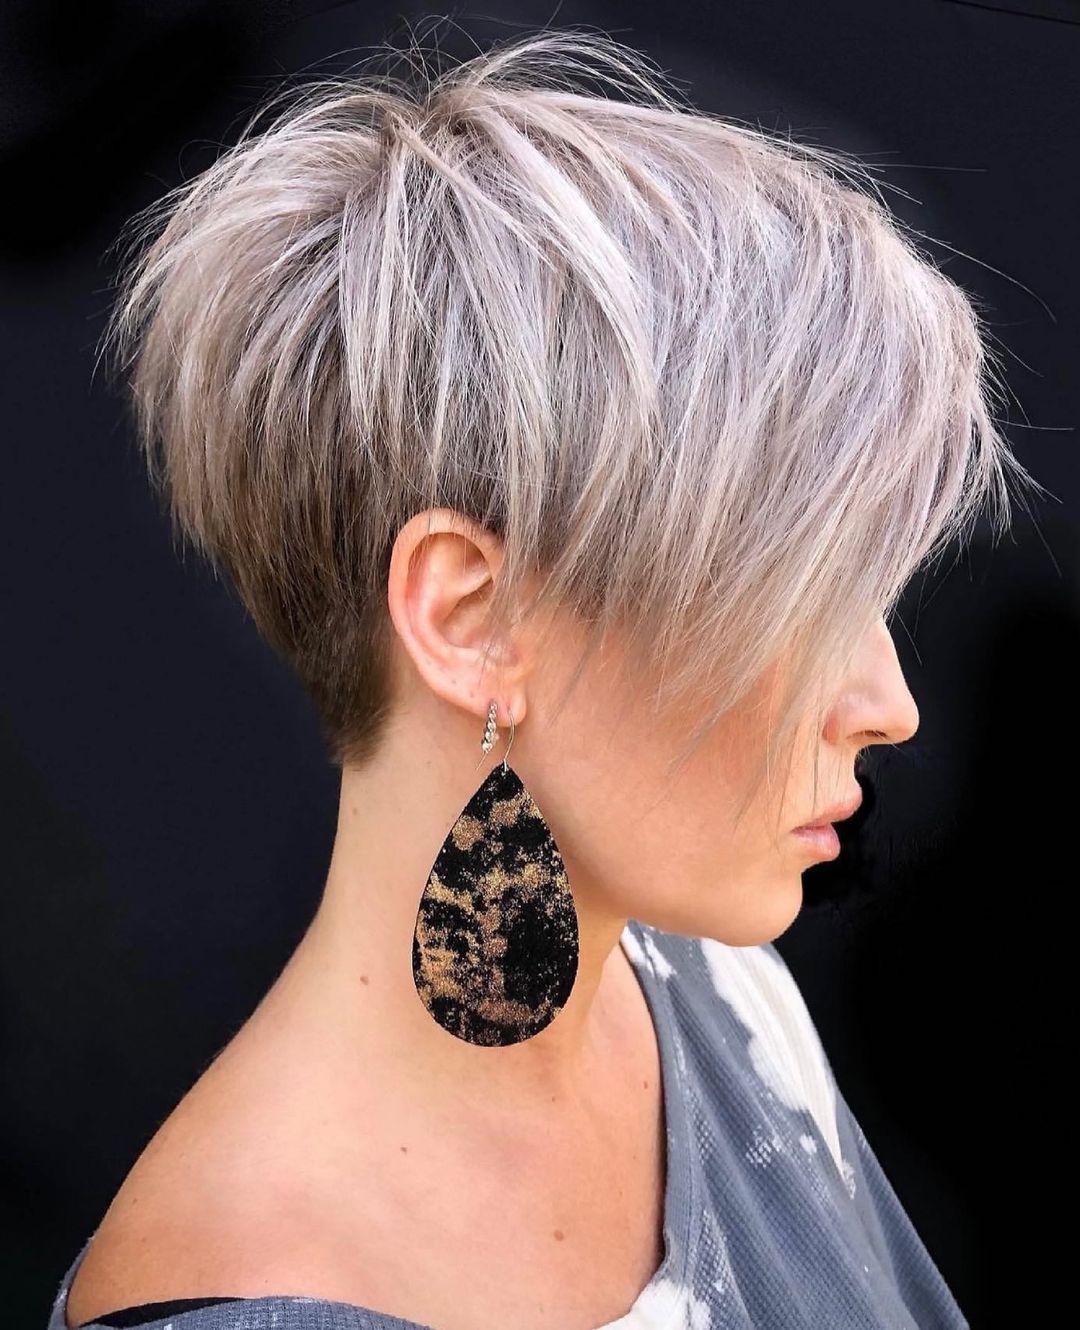 10 Best Ideas for Short Pixie Cuts & Hairstyles